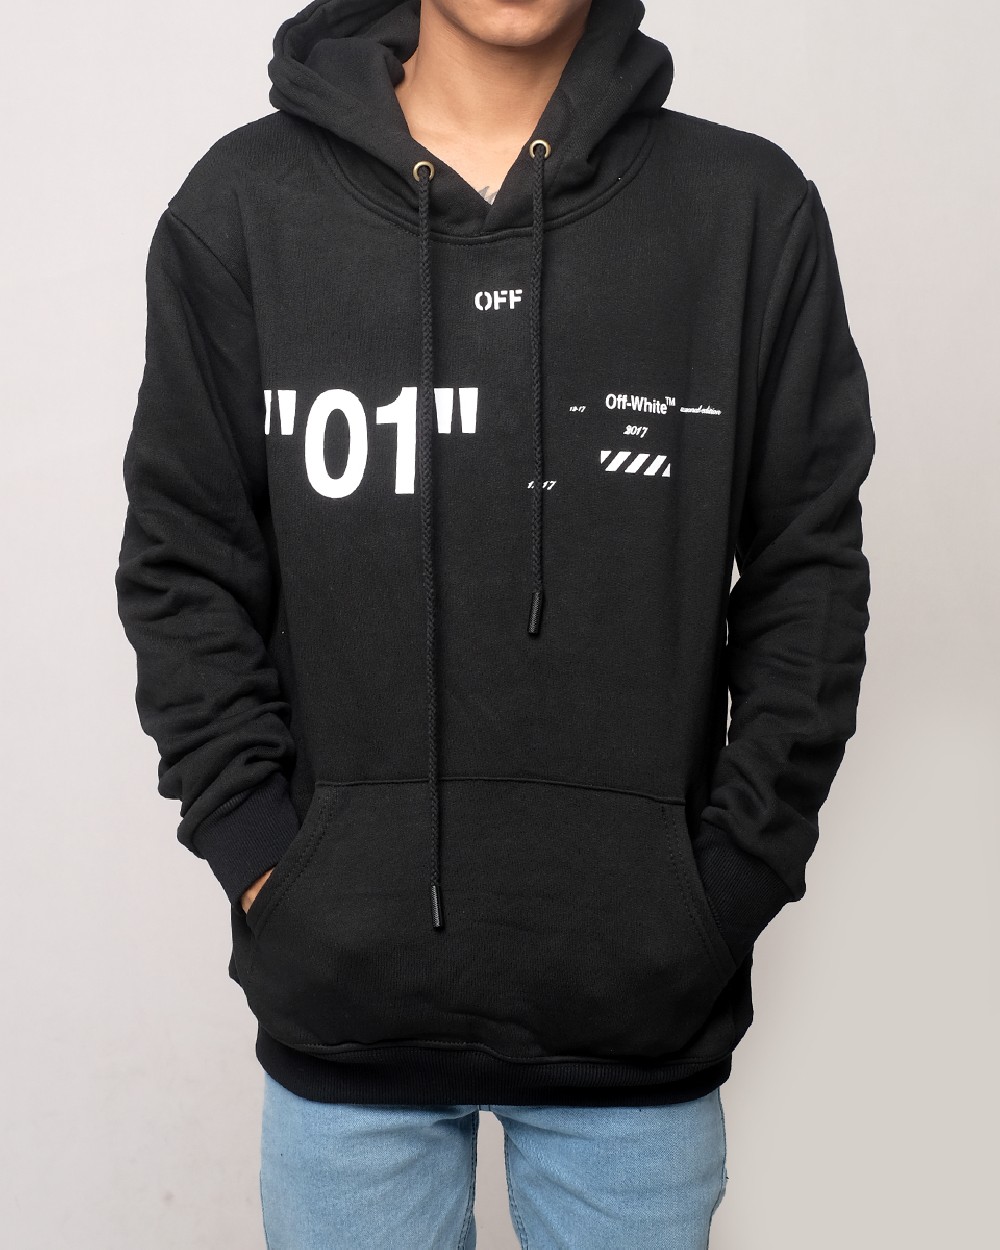 Off White For All Hoodie 01 Factory Sale, UP TO 63% OFF | www 